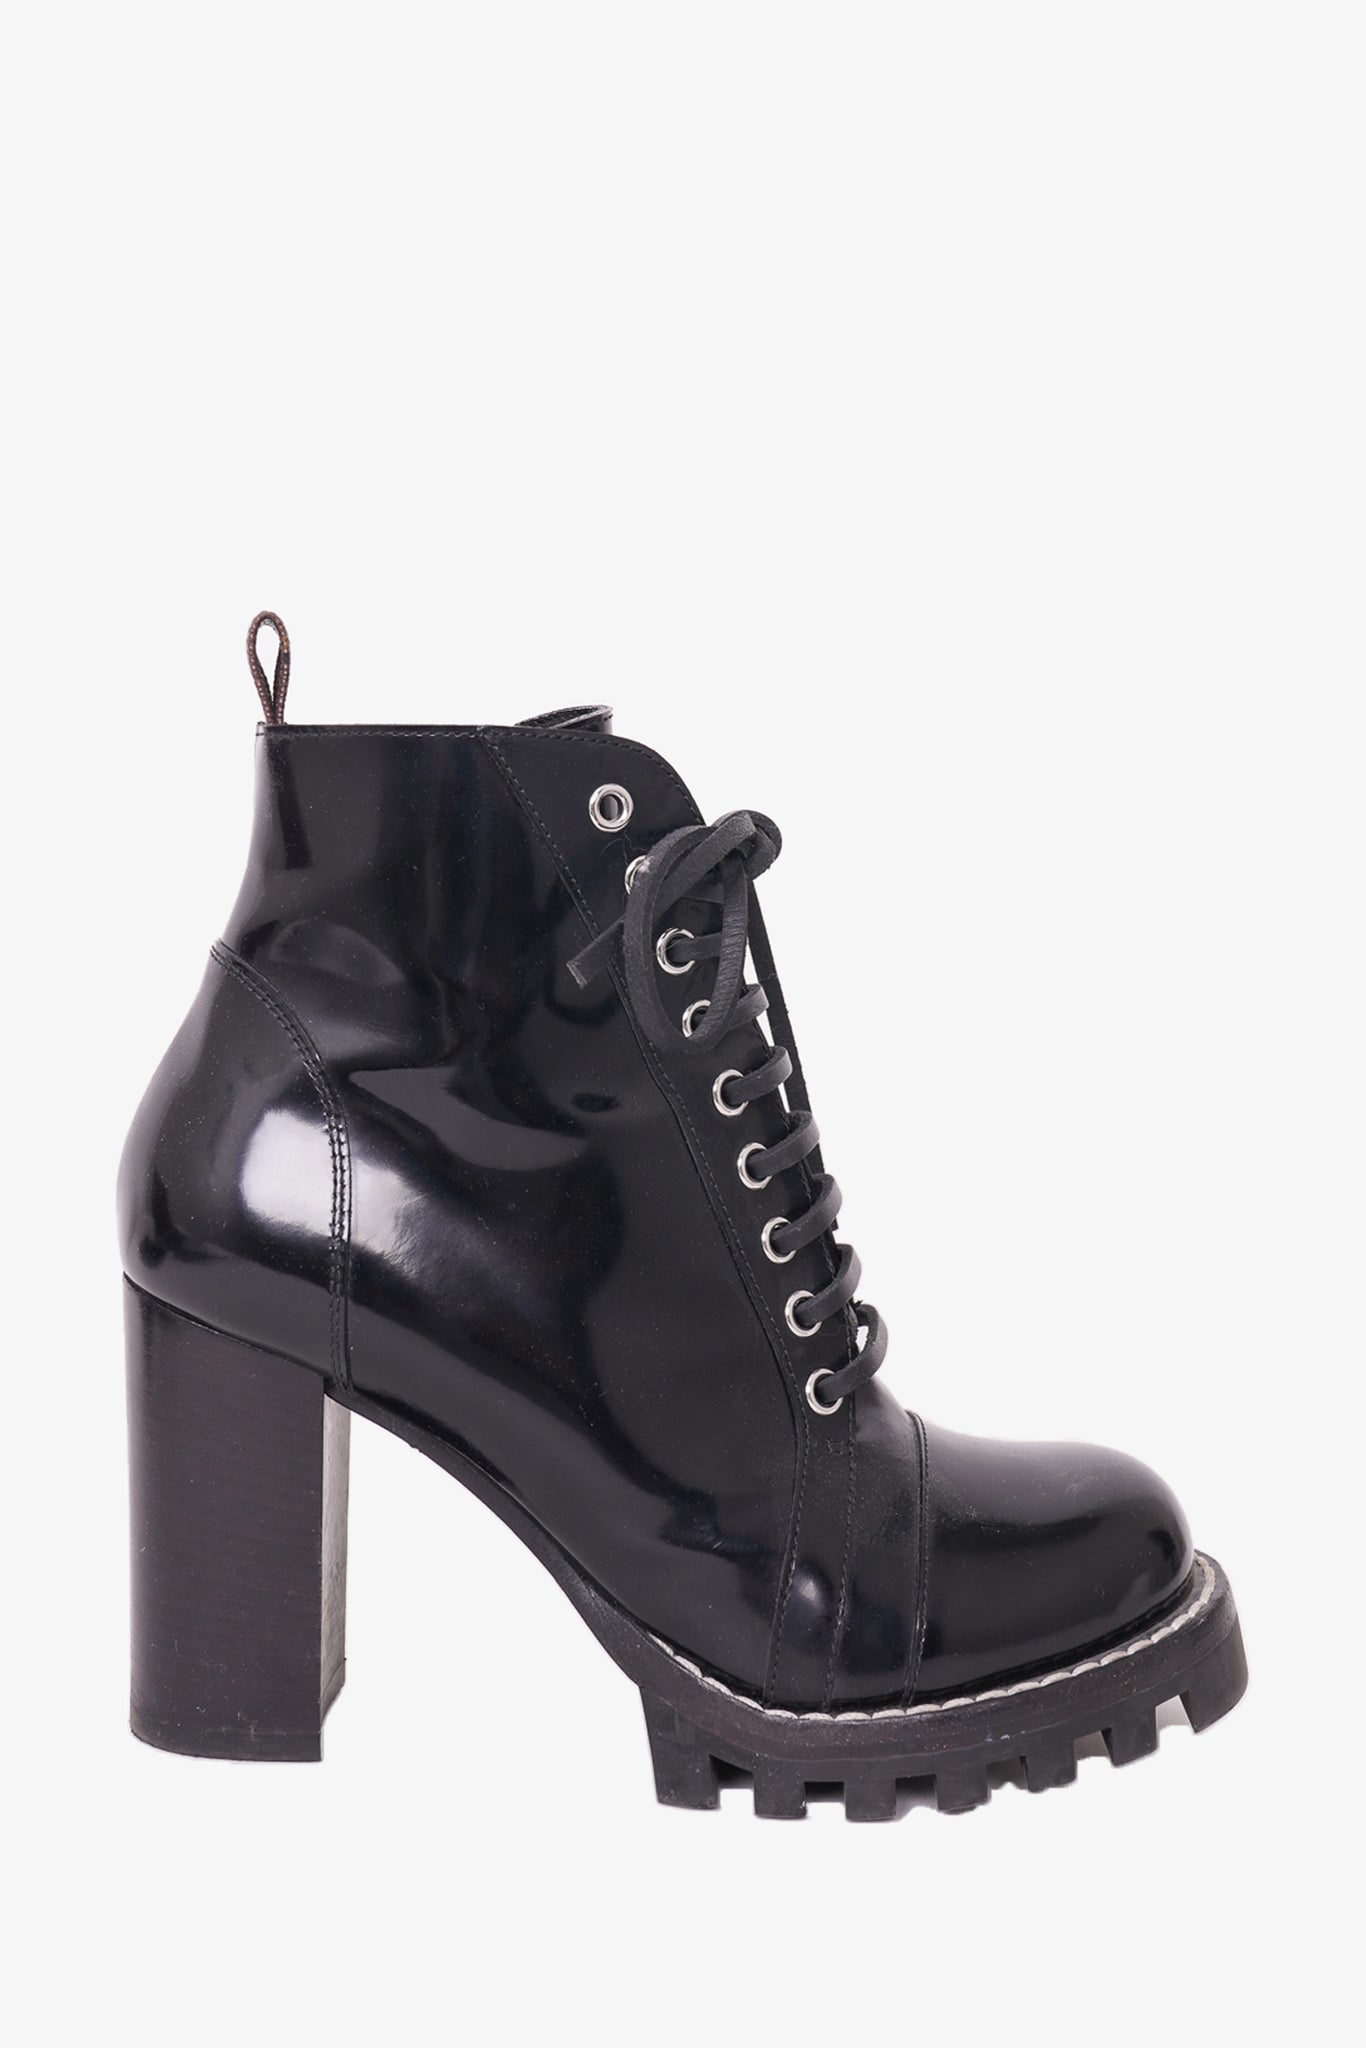 chanel black and white ankle boots